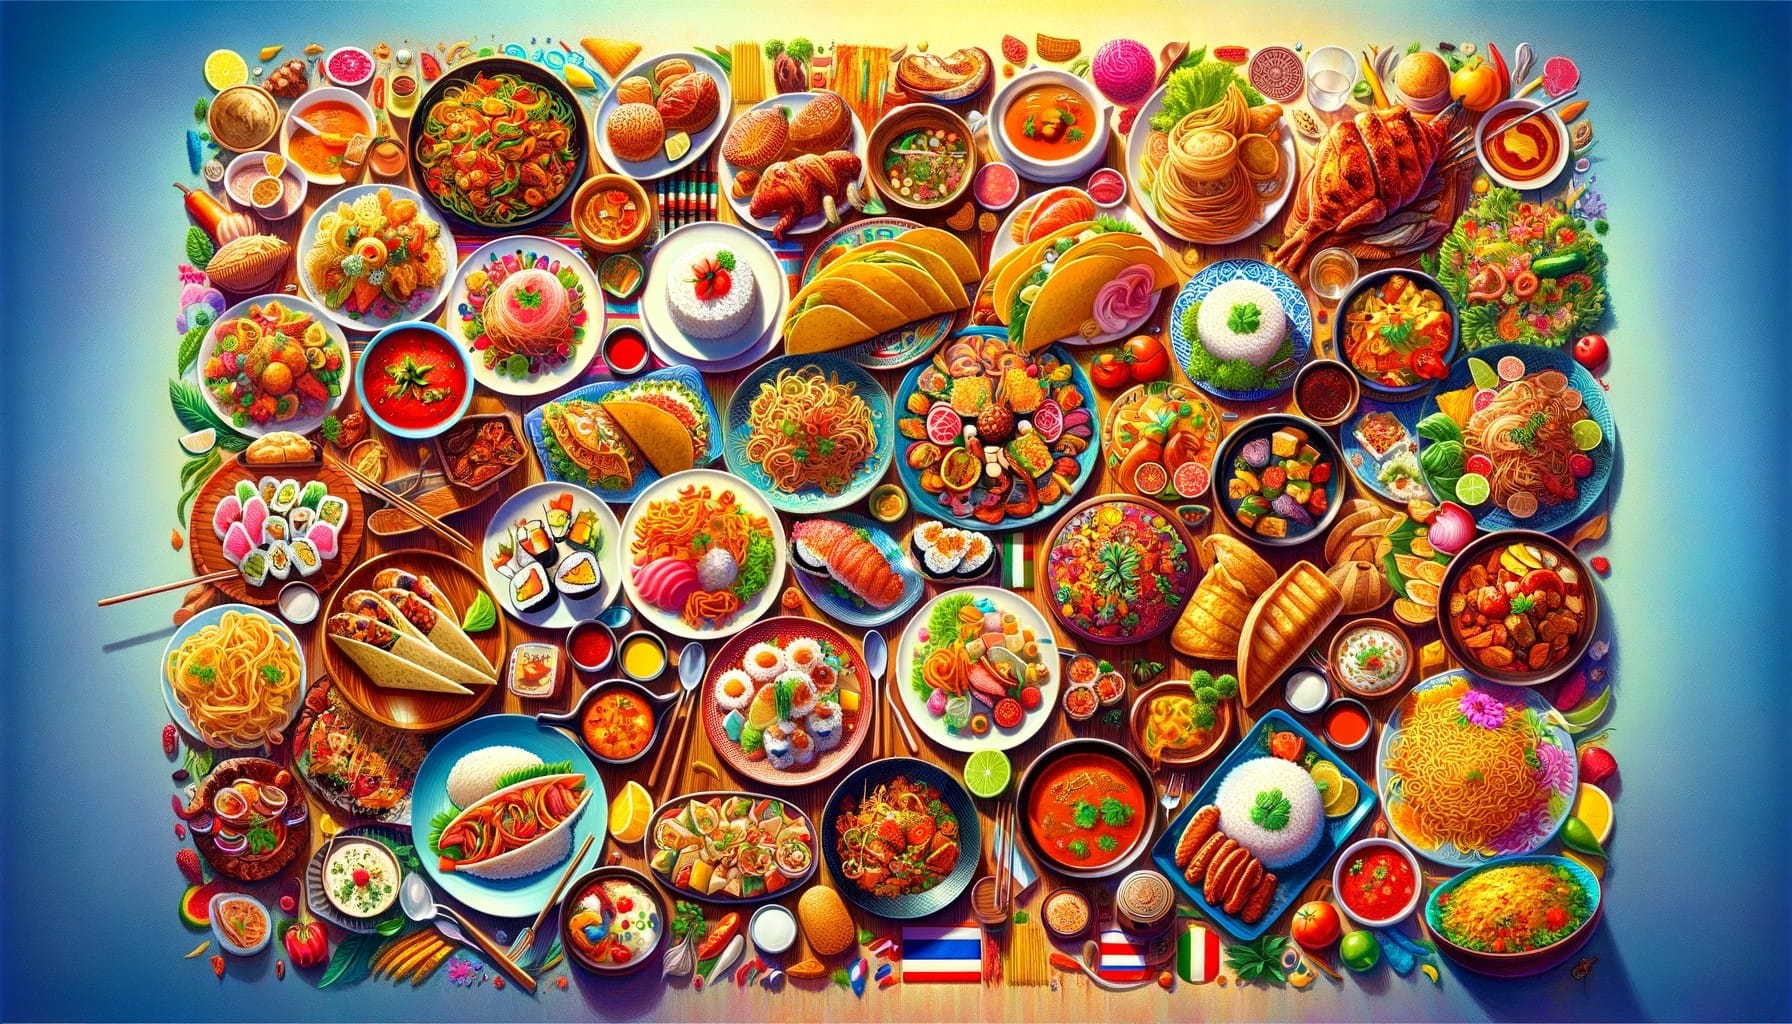 DALL·E 2023-11-15 14.59.33 - A vibrant and colorful display of various international cuisines, showcasing dishes from different countries around the world. The image features a la